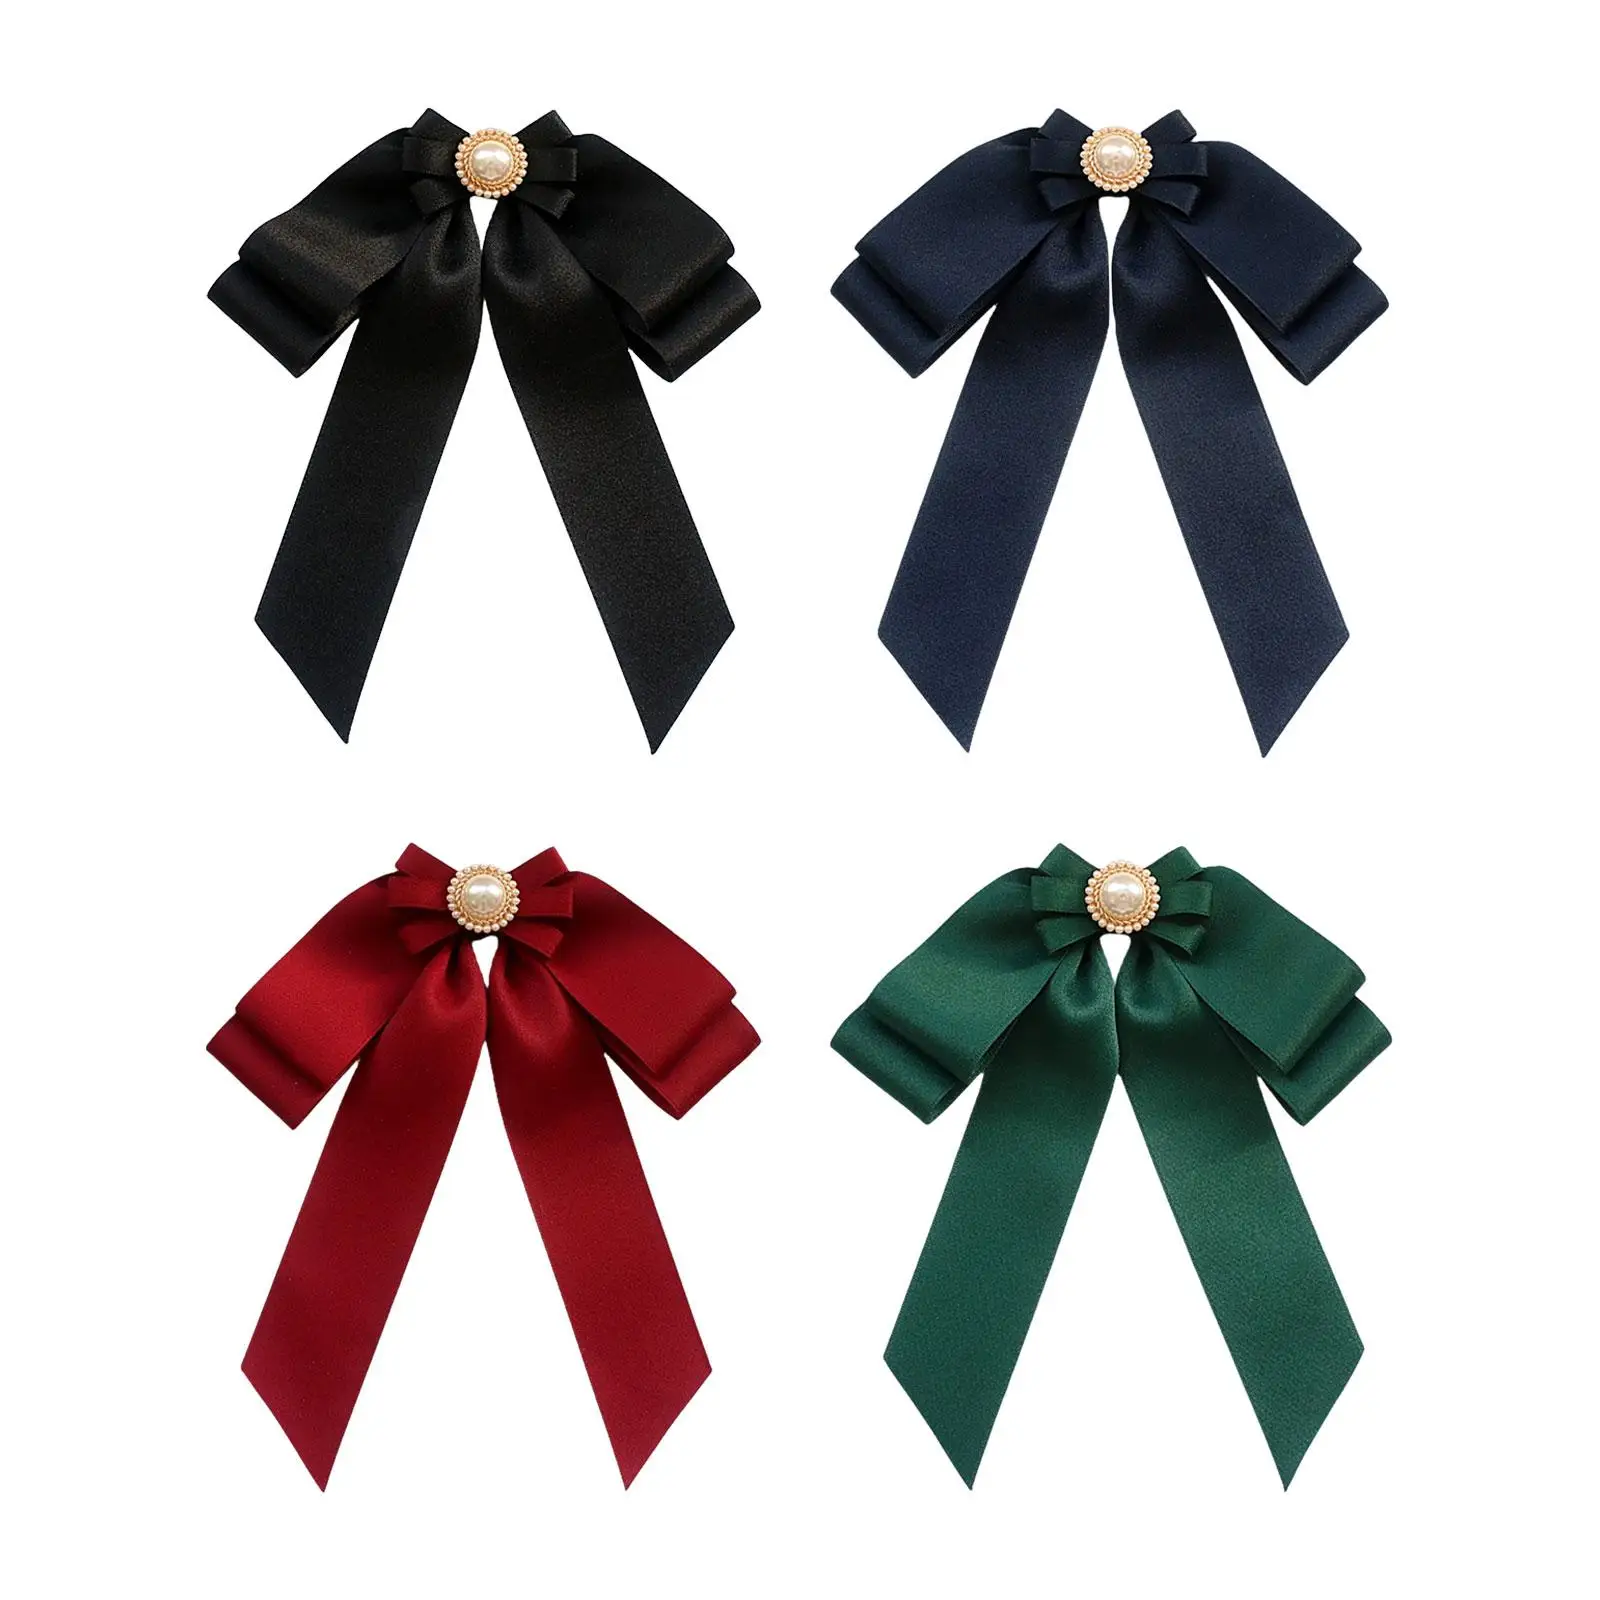 Women`s Pre Tied Bowknot Brooch Decoration Creative Lightweight Fashion Ribbon Brooch for Dress Scarf Shirts Tuxedo Anniversary